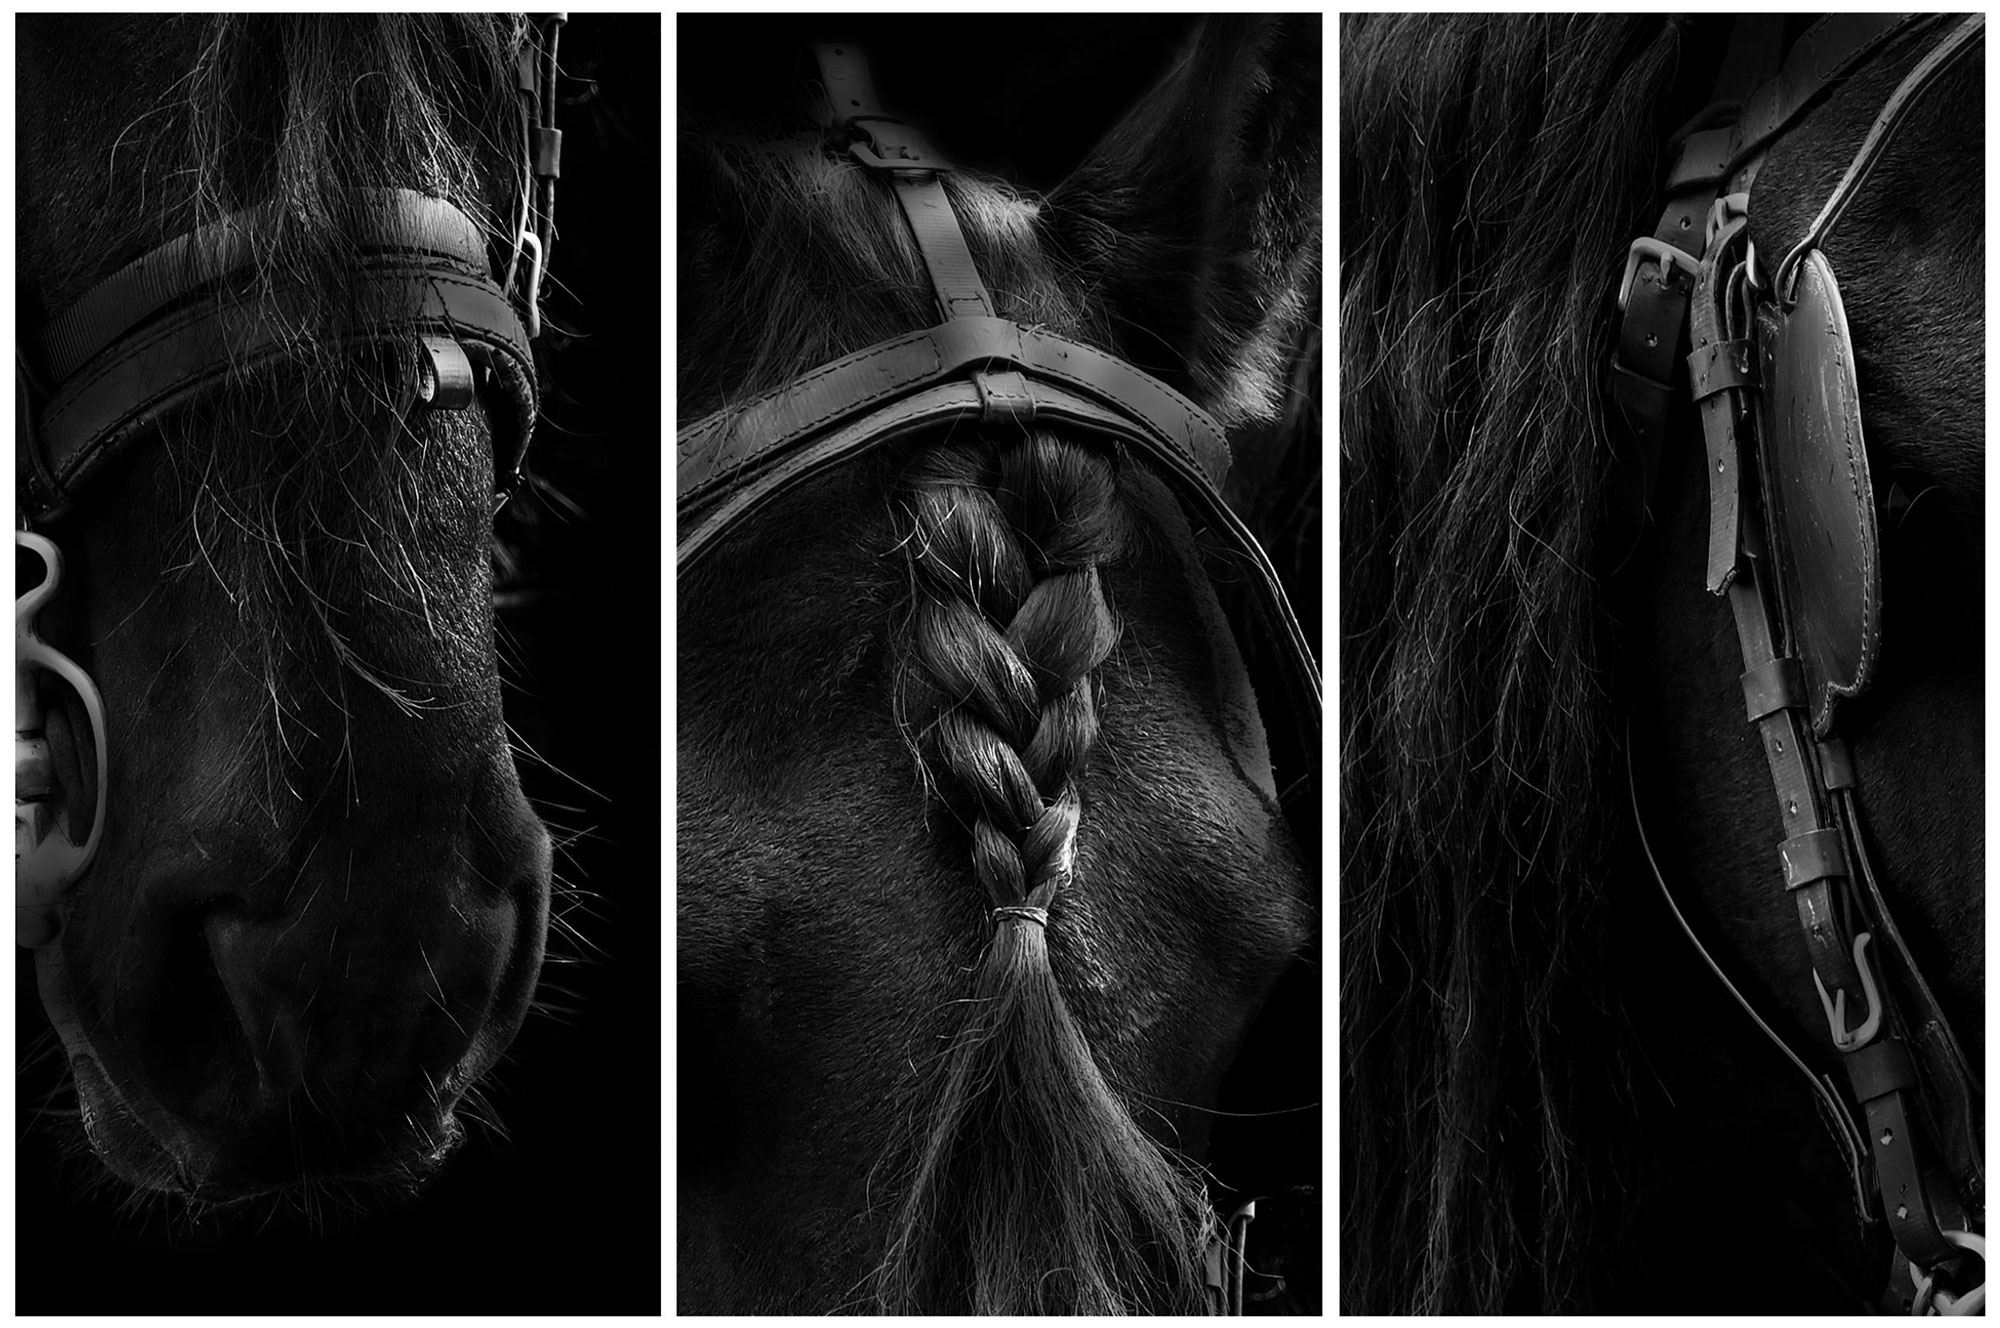 Triptych – Parts of Animals of the Same Species